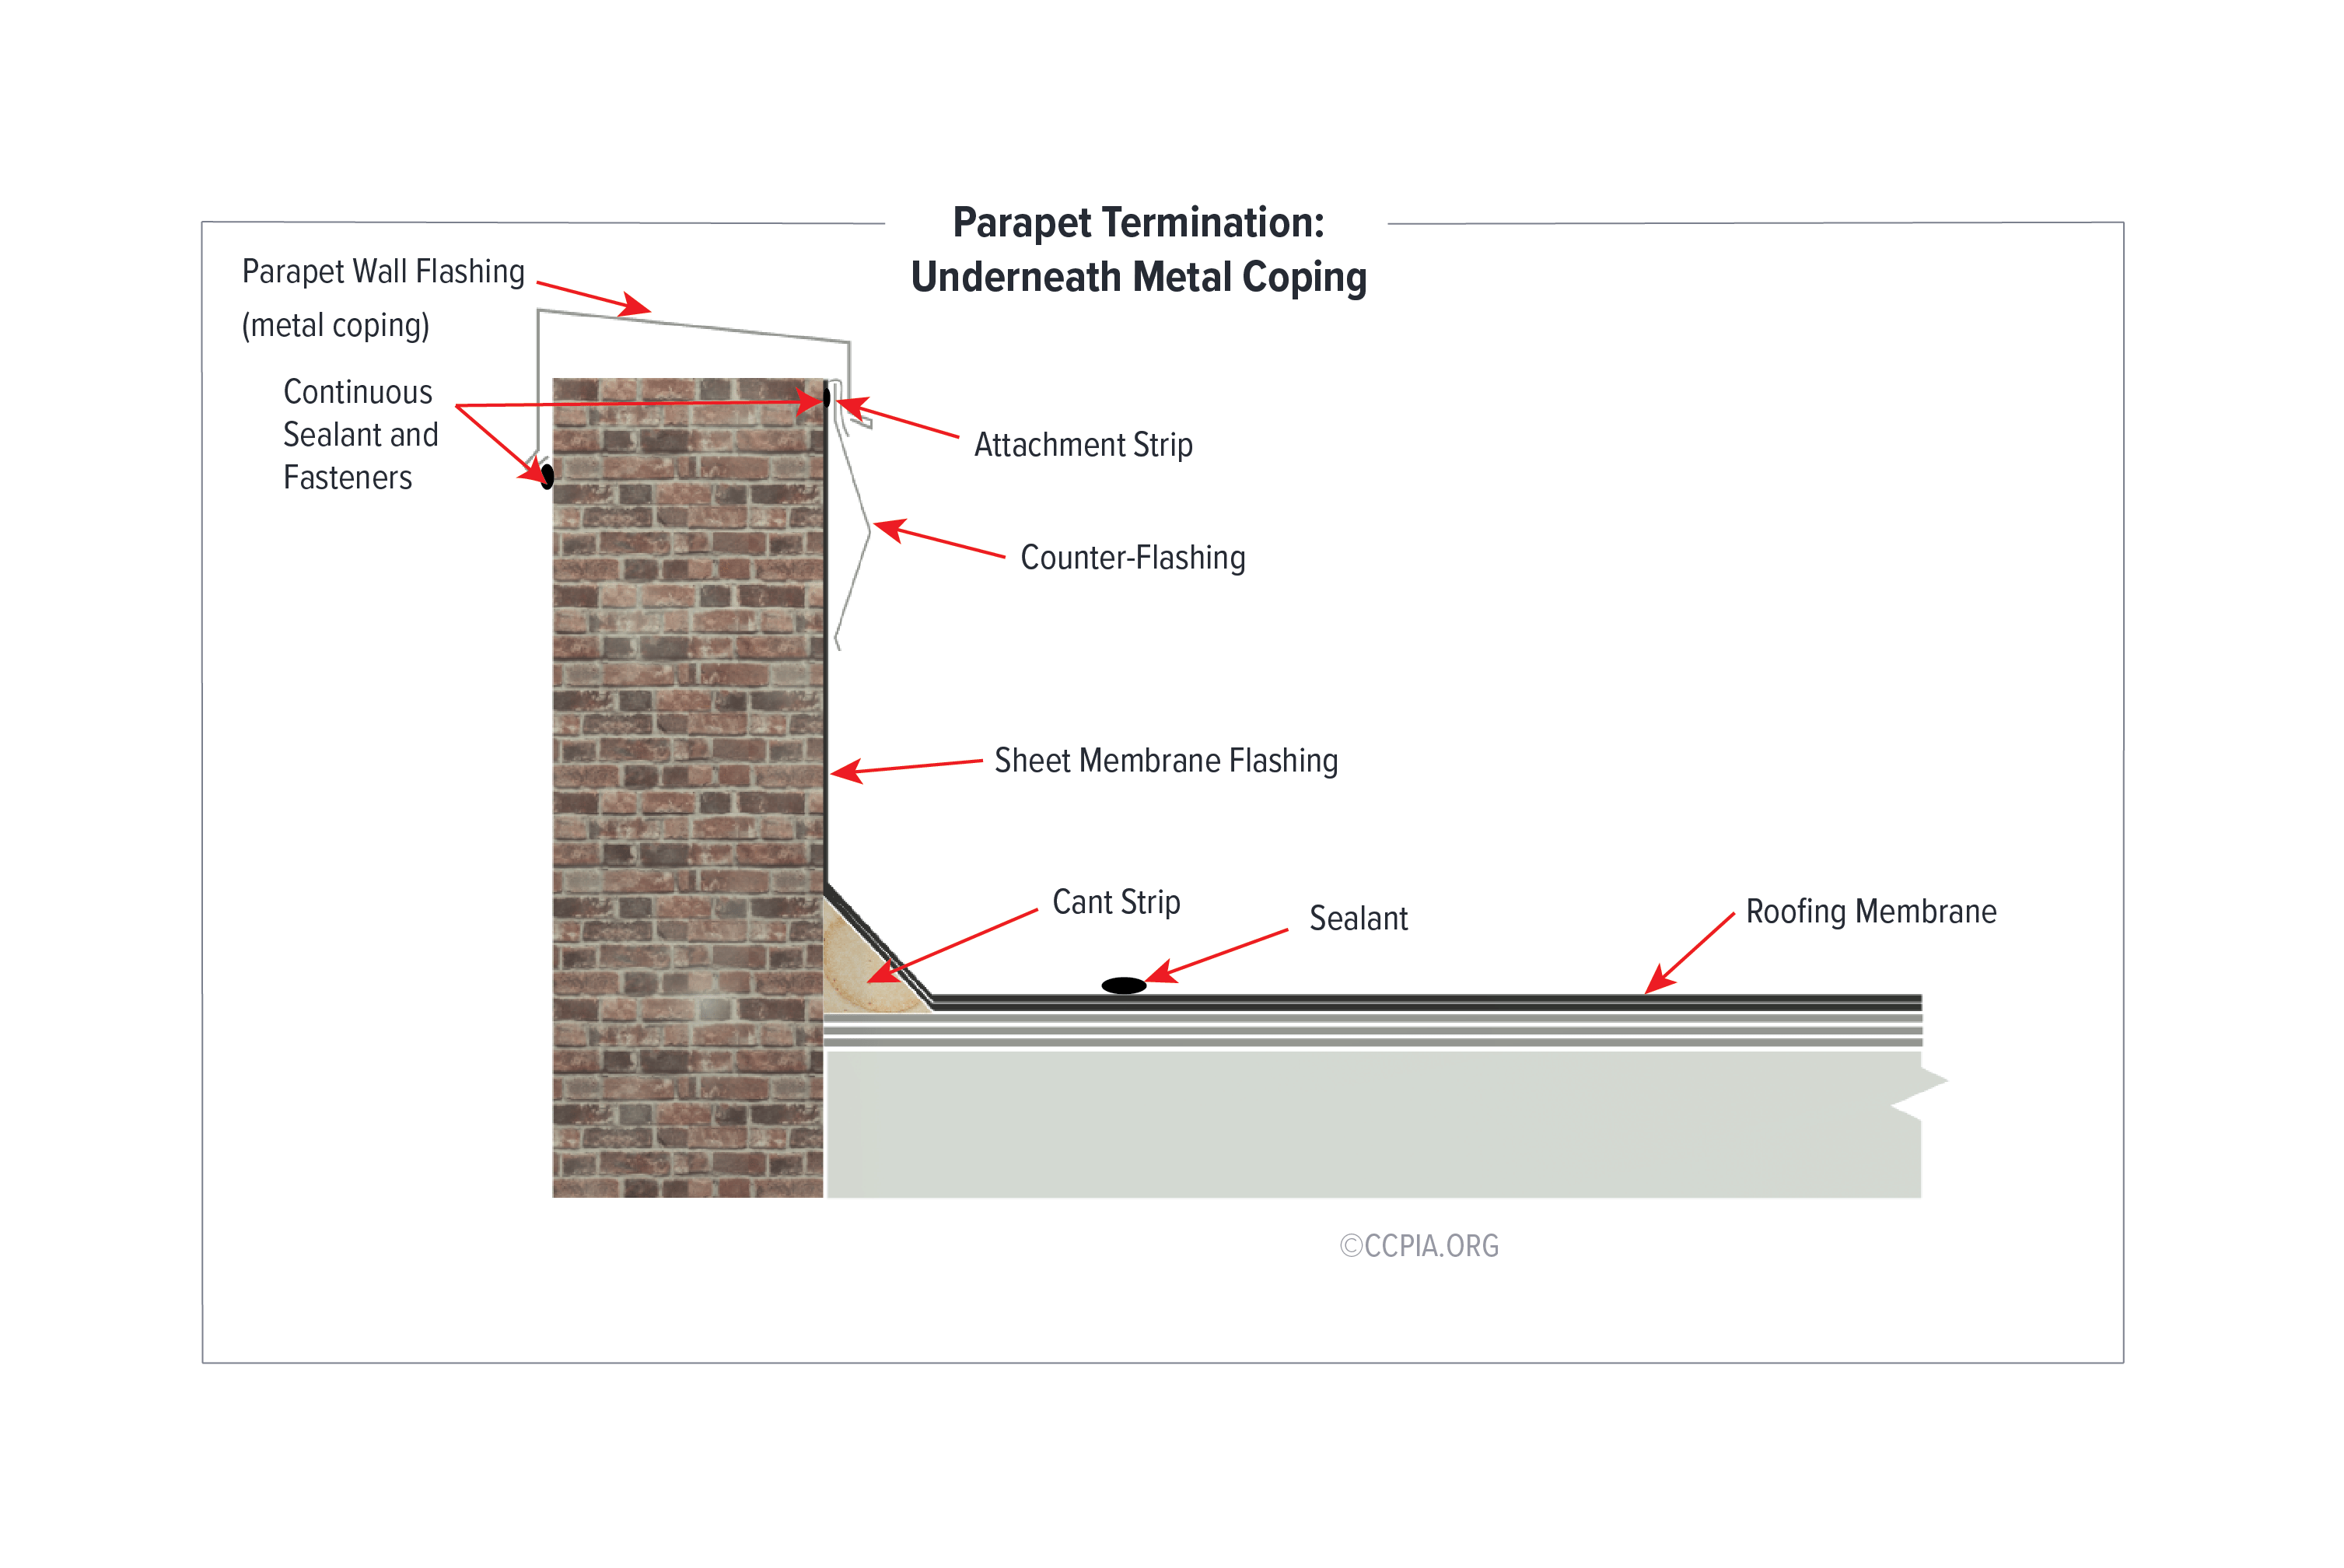 Low-Slope Roofing. Parapet Termination: Underneath Metal Coping.